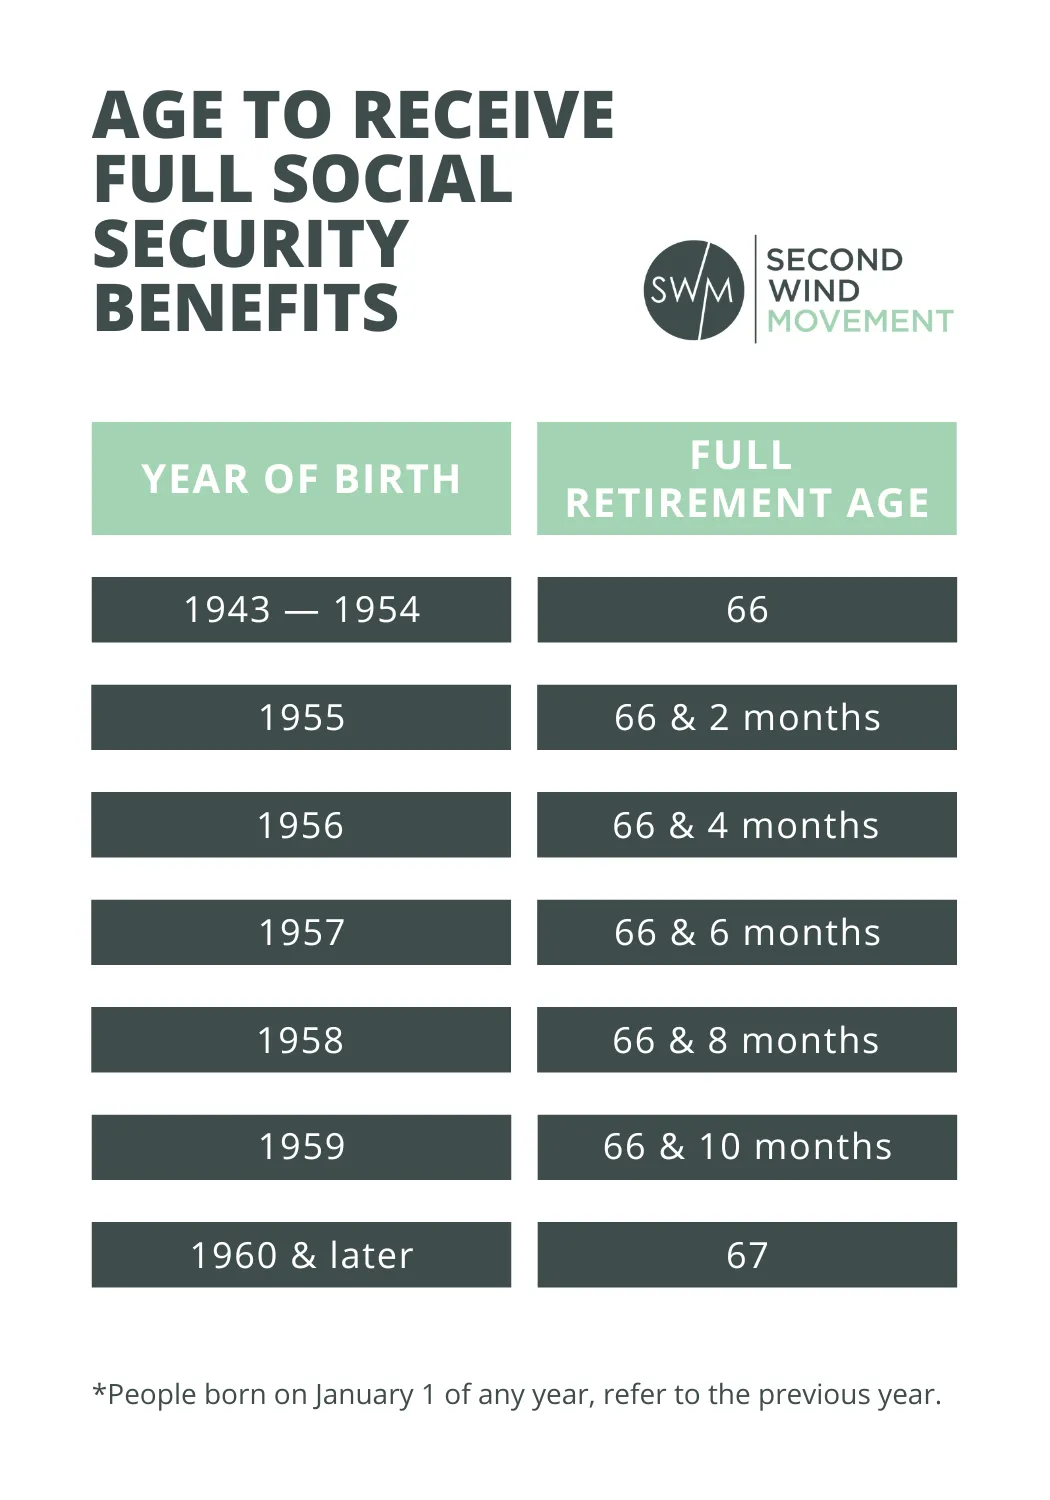 age to receive social security benefits in the us and the official retirement age